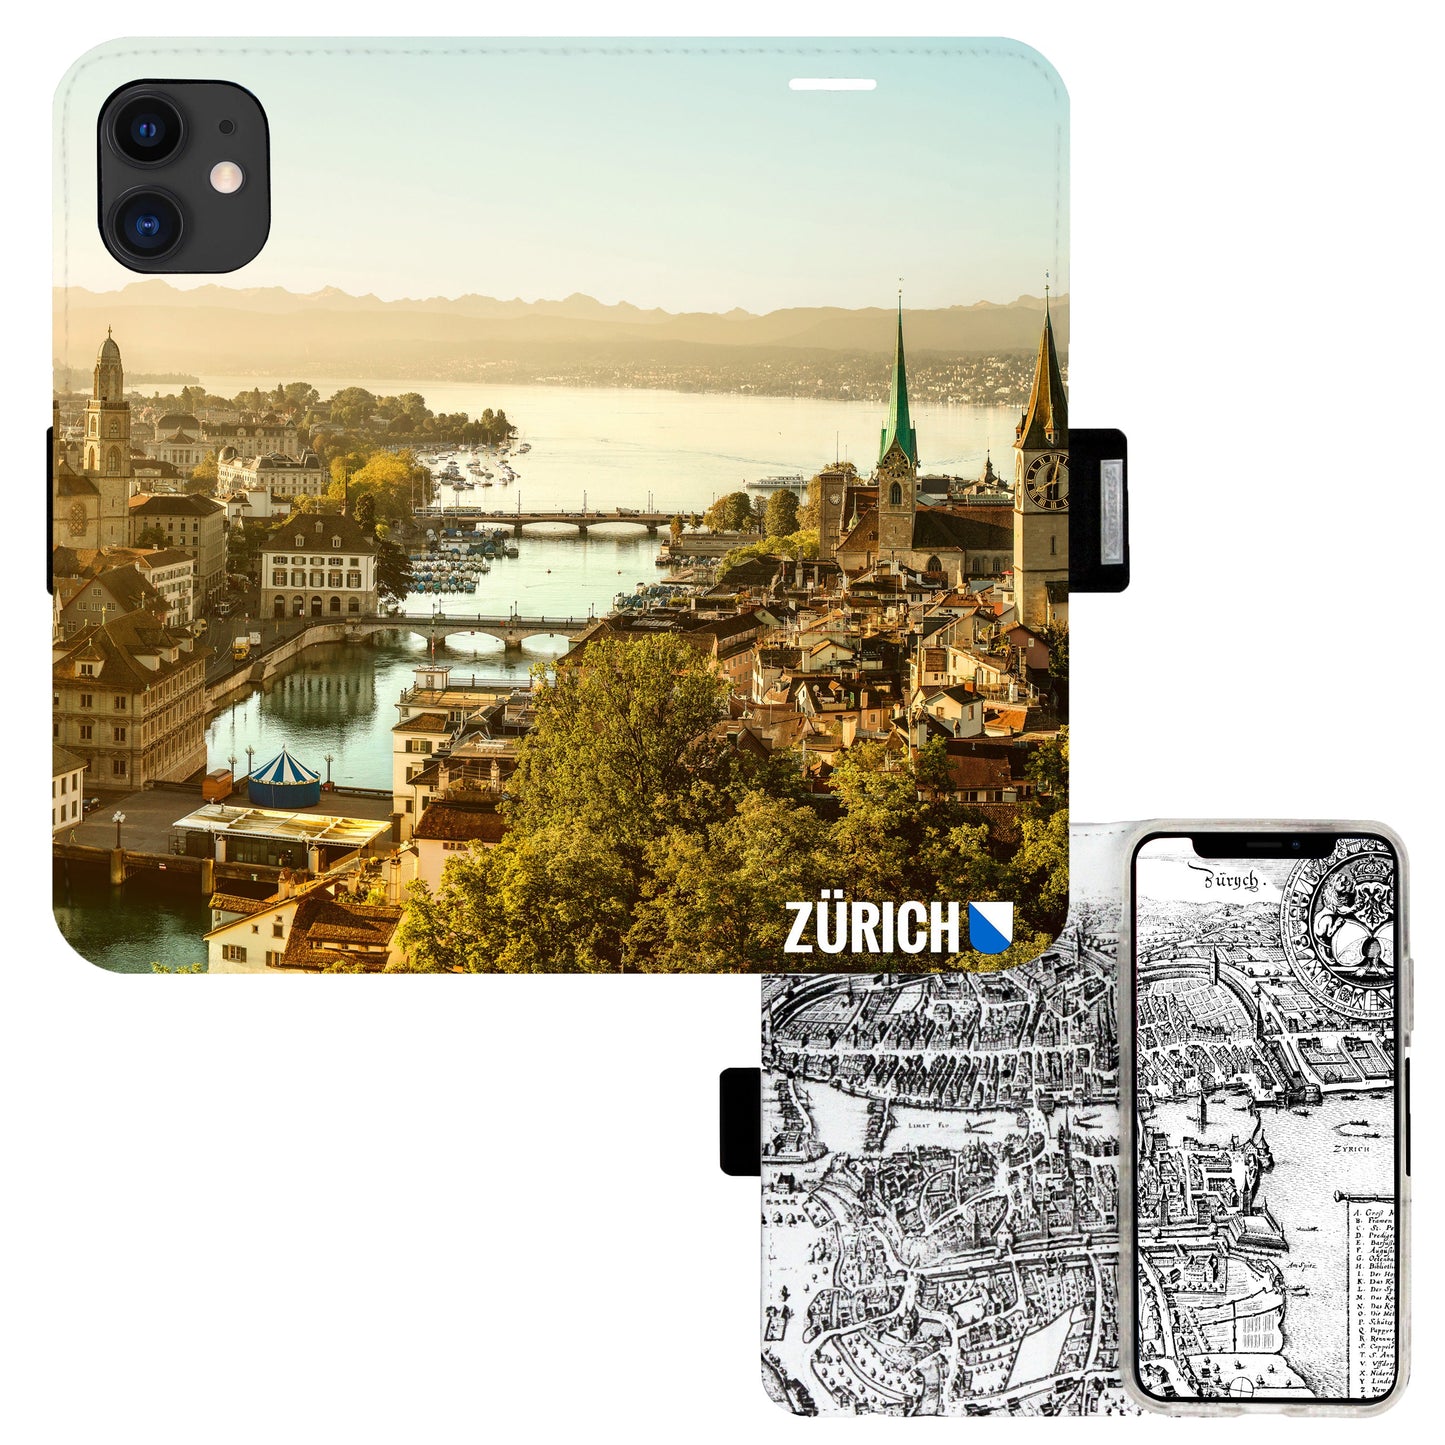 Zurich City from Above Victor Case for iPhone 11 